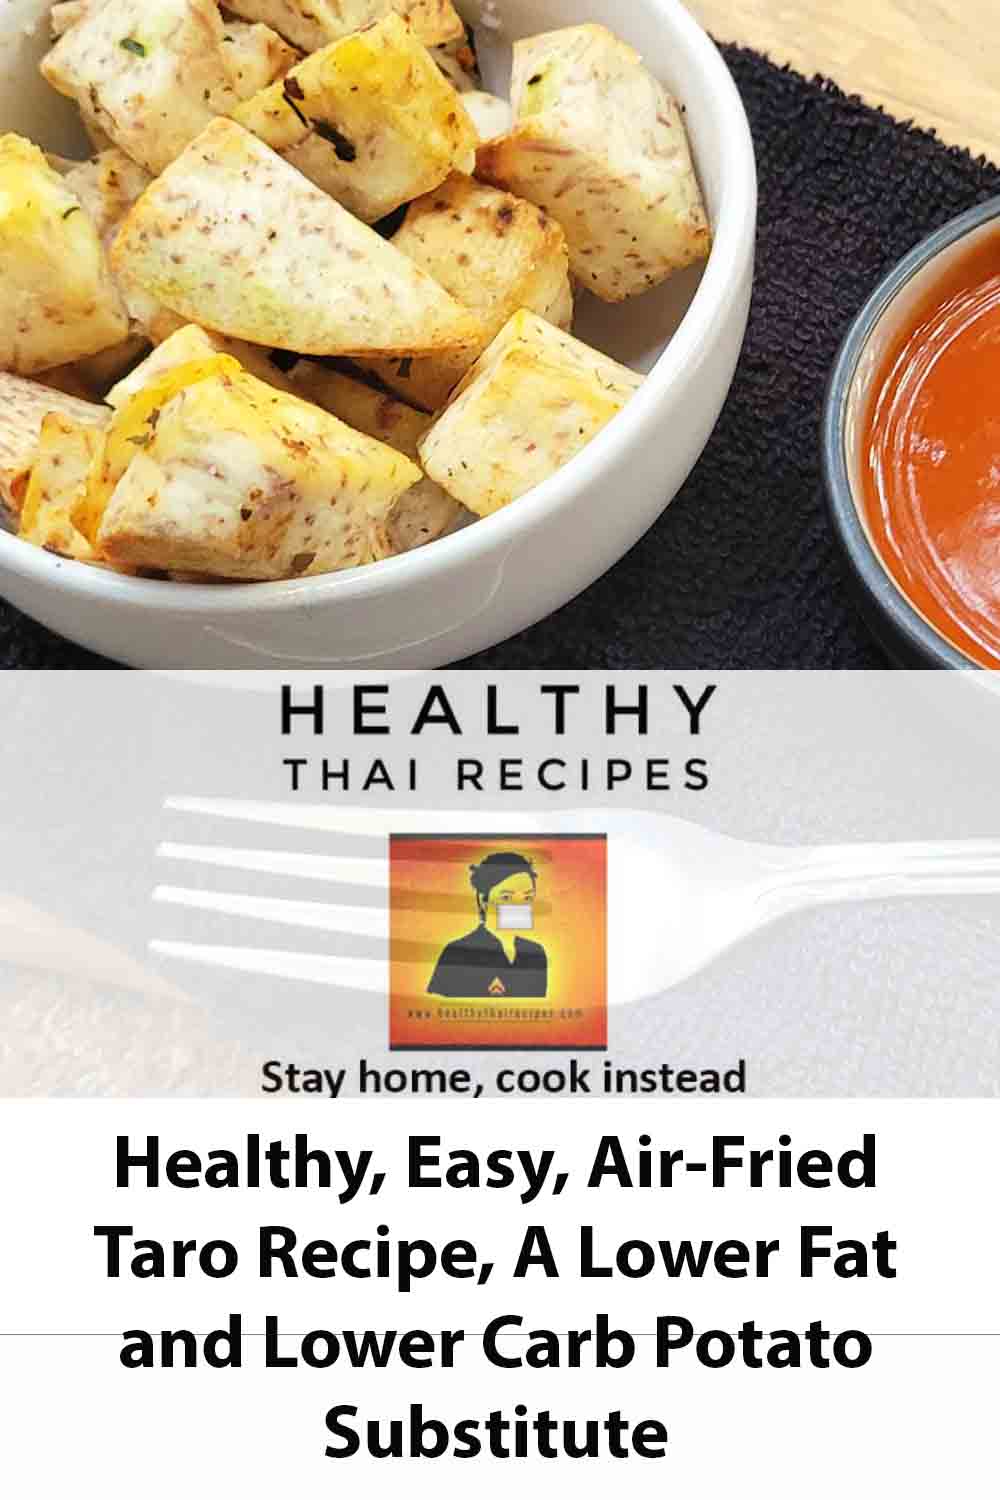 Healthy, Easy, Air-Fried Taro Recipe, A Lower Fat and Lower Carb Potato Substitute, Pinterest Image